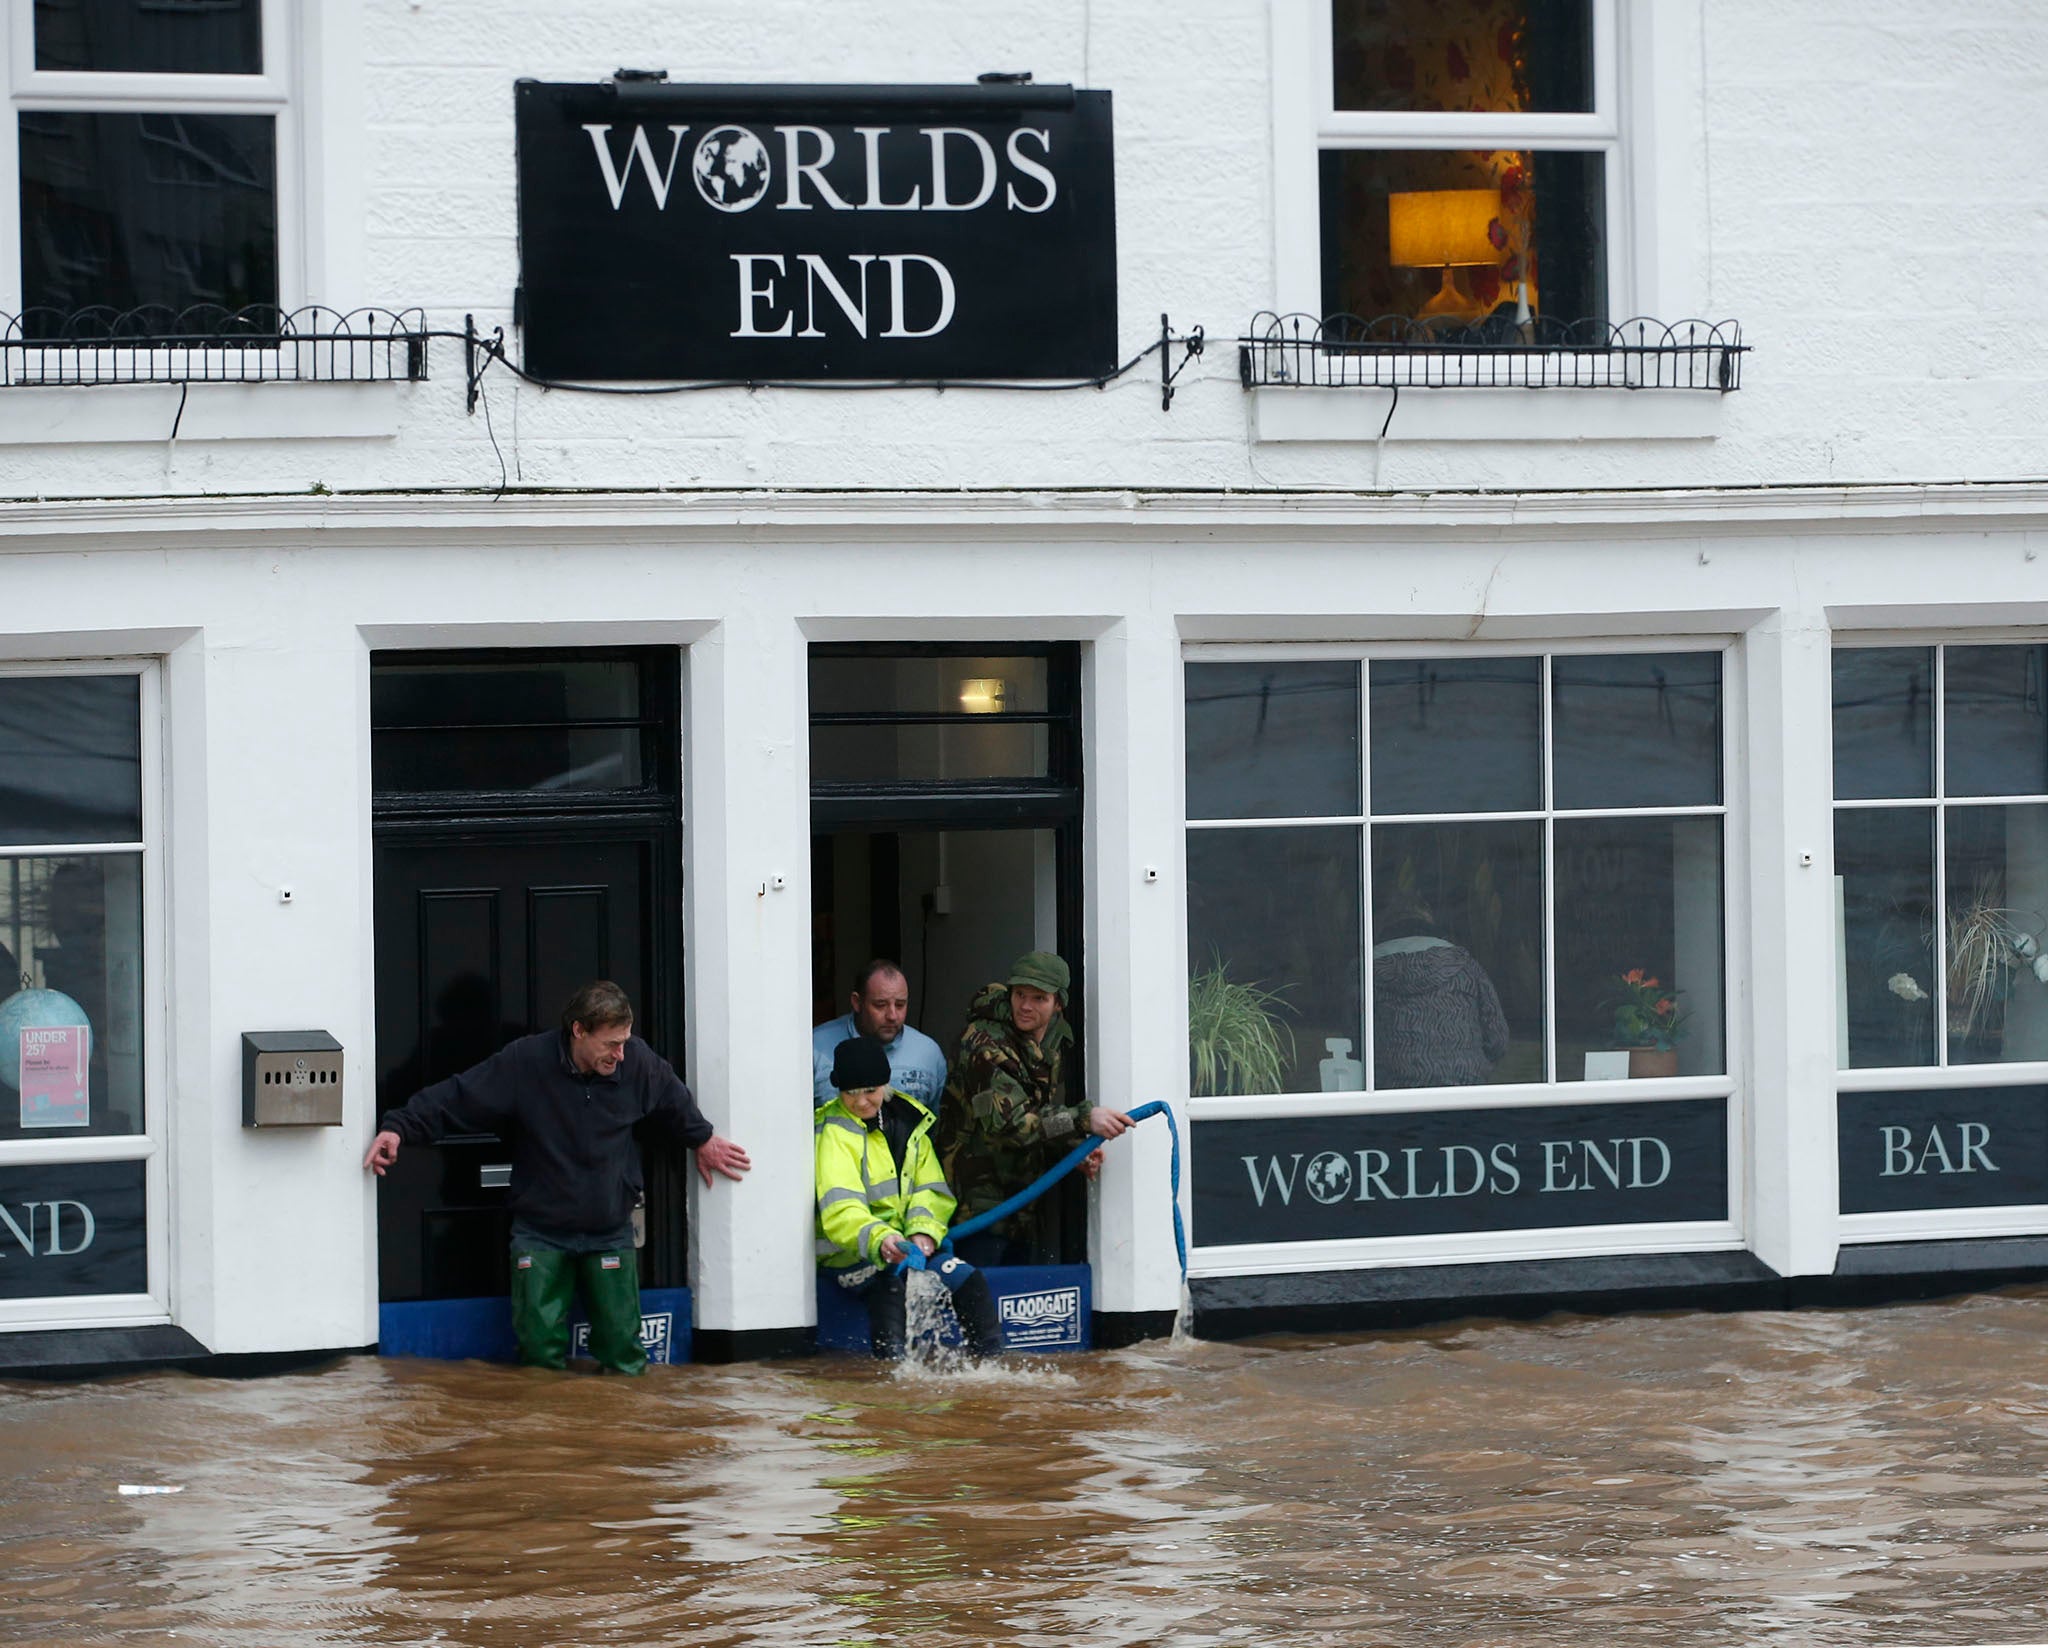 &#13;
Staff at the Worlds End bar in Dumfries Scotland desperately try to pump floodwater out of the building&#13;